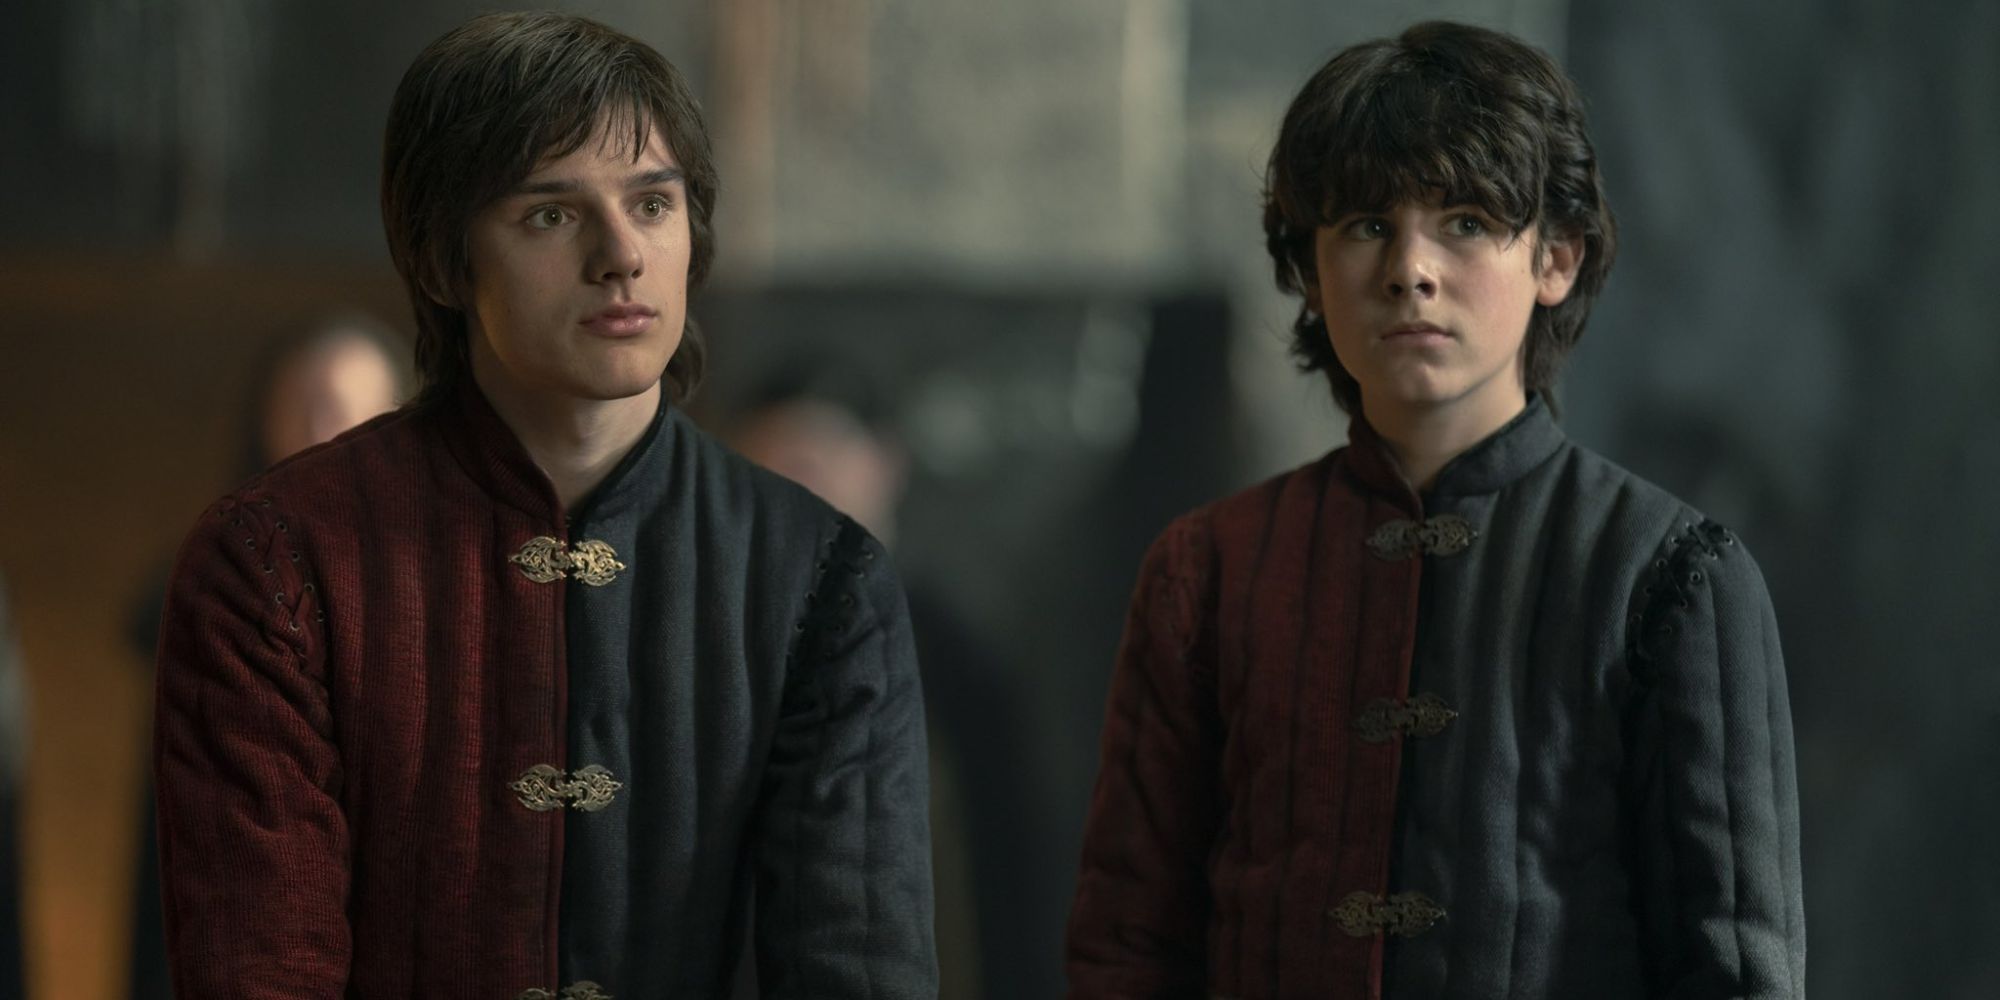 Brothers Jacerys and Lucerys Velaryon in HBO's House of the Dragon Season One